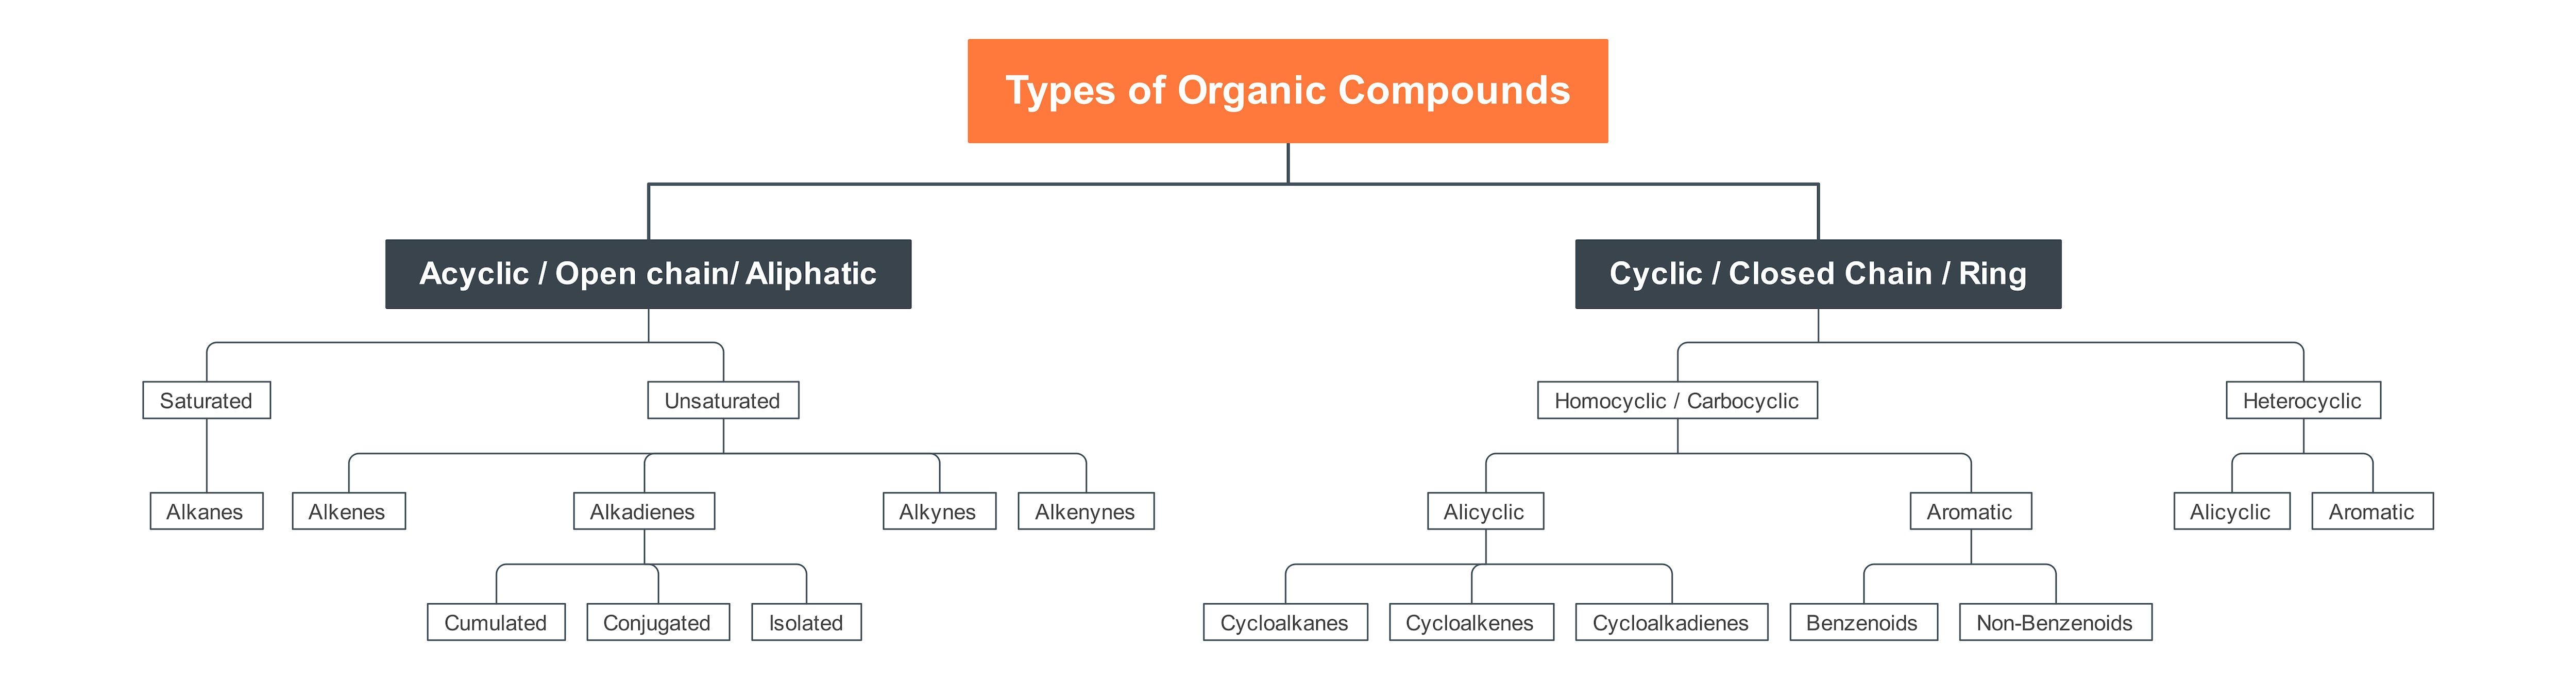 type of organic compounds 1